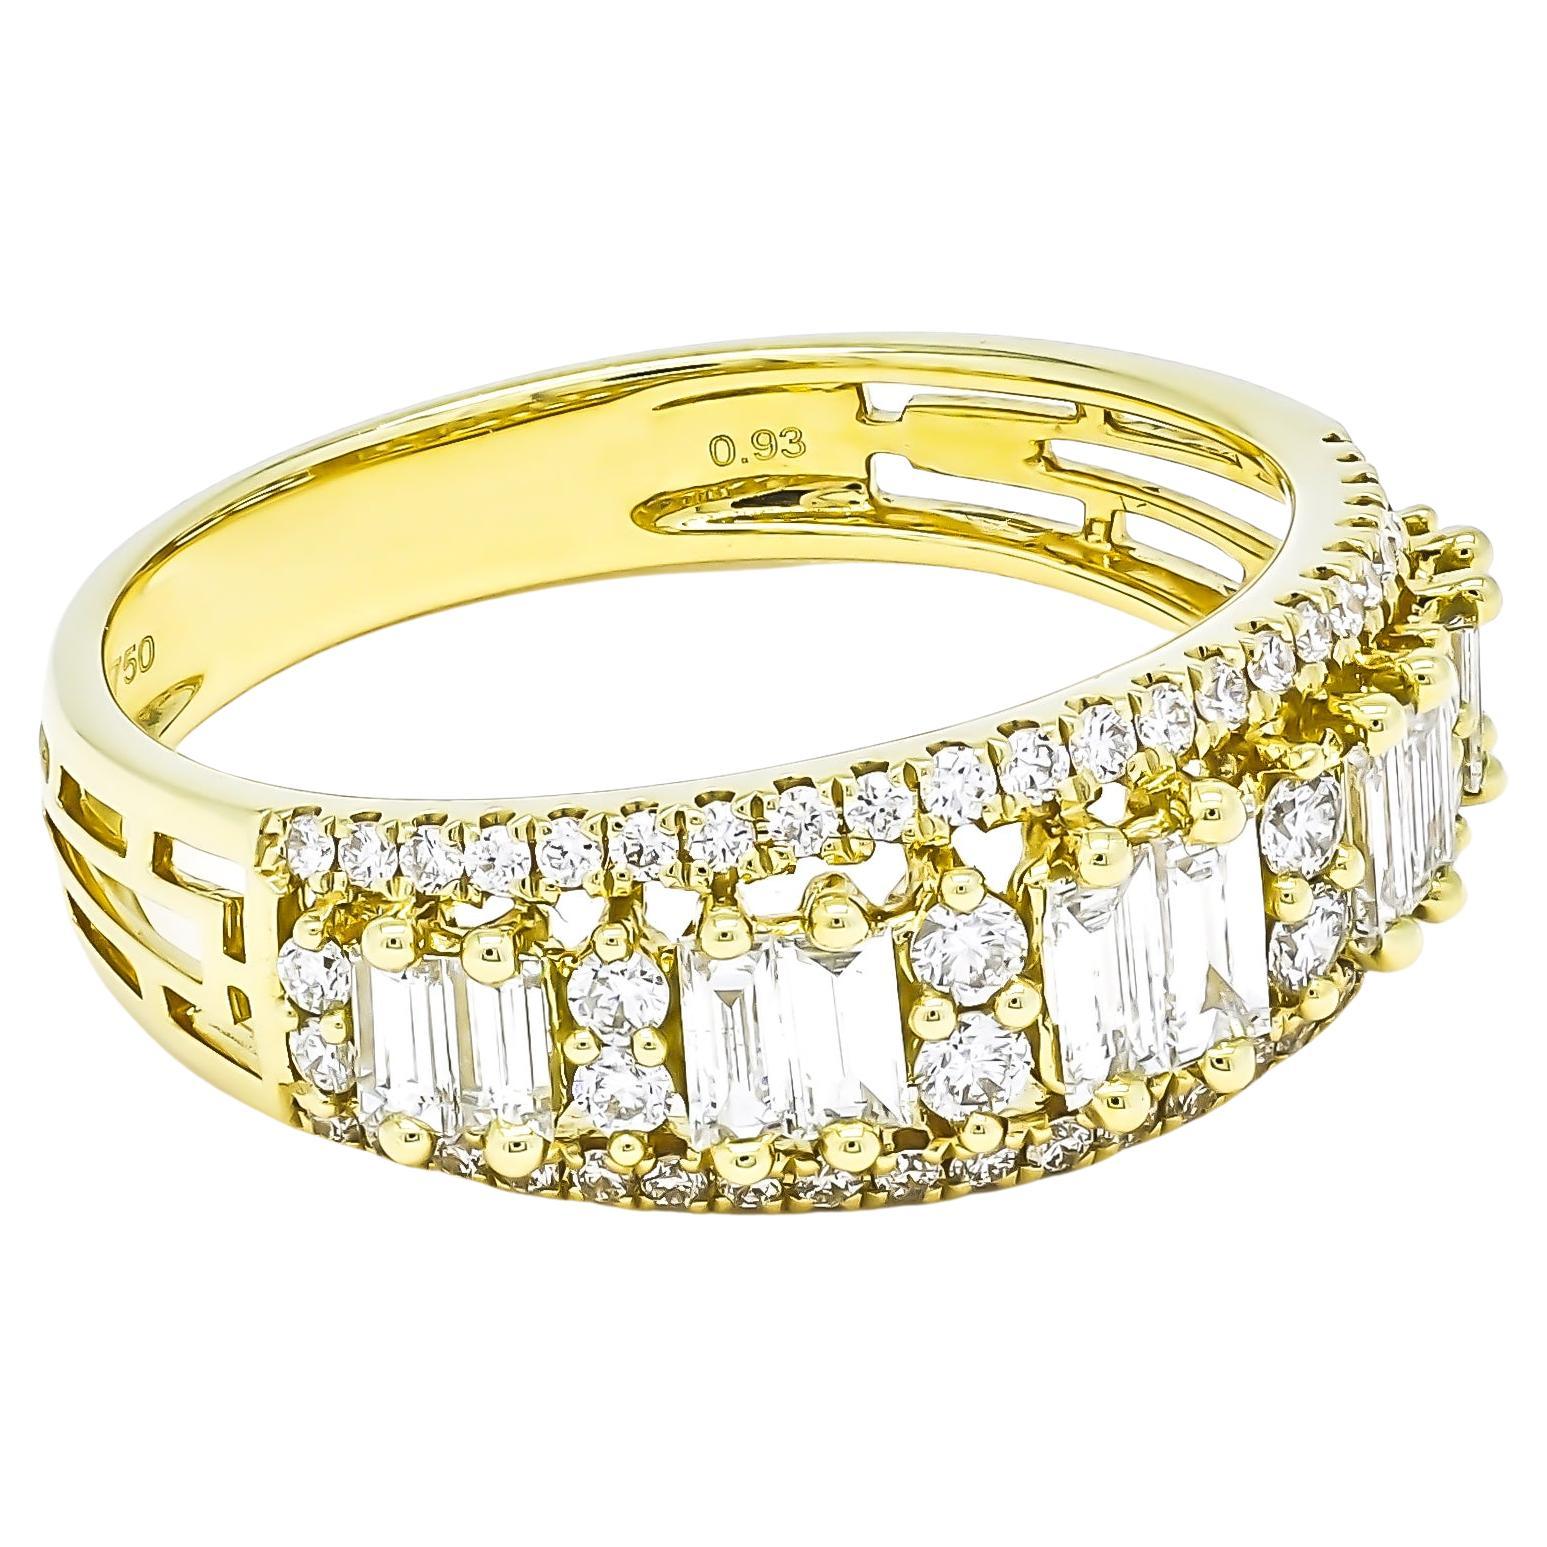 This 18KT Yellow Gold Baguette Natural Diamond Art Deco Wedding Anniversary Band Ring is the epitome of timeless elegance. The sparkling baguette diamonds are set in a unique Art Deco design, making this ring a true work of art. The 18kt yellow gold